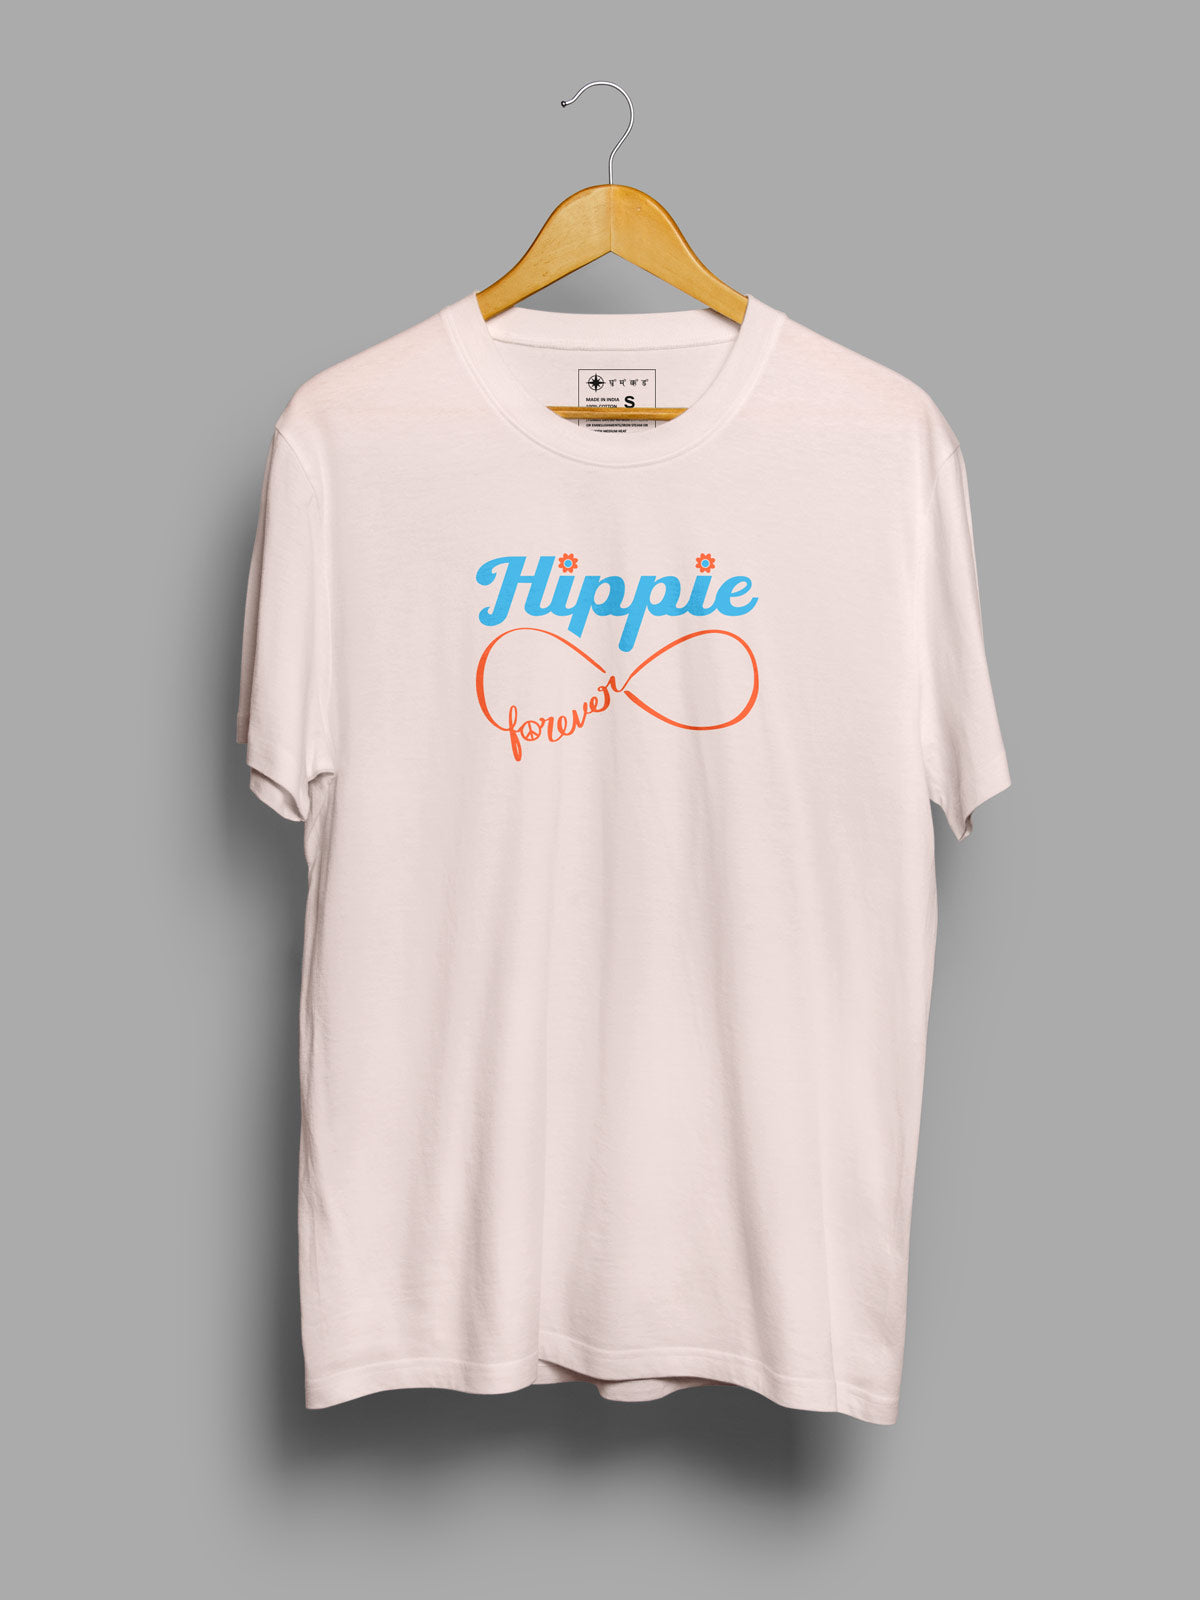 Hippie-forever-printed-t-shirt-for-men by Ghumakkad